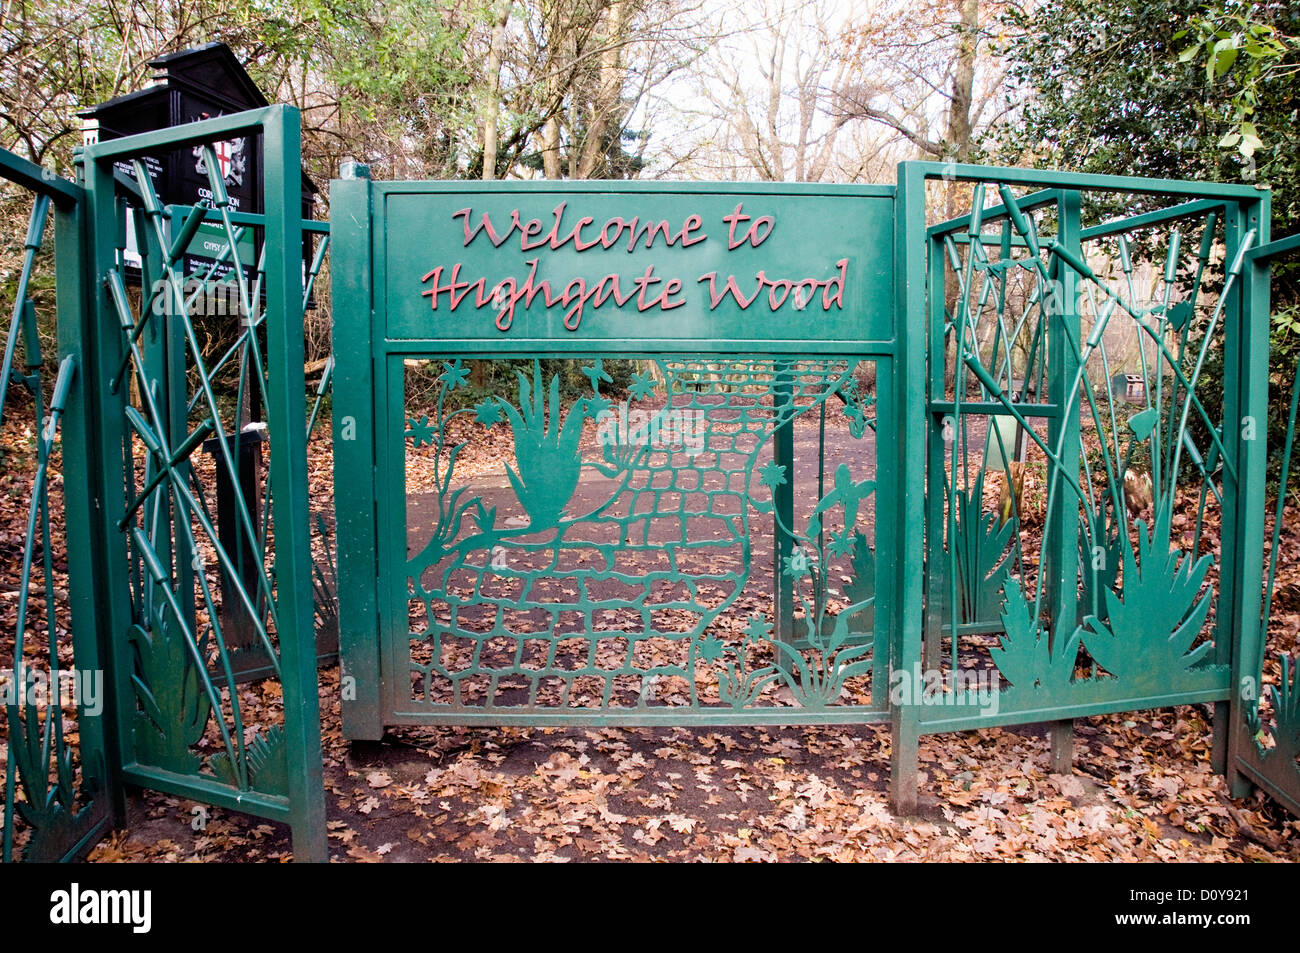 Ornate metal gate with Welcome to Highgate Wood printed on it, London England UK Stock Photo